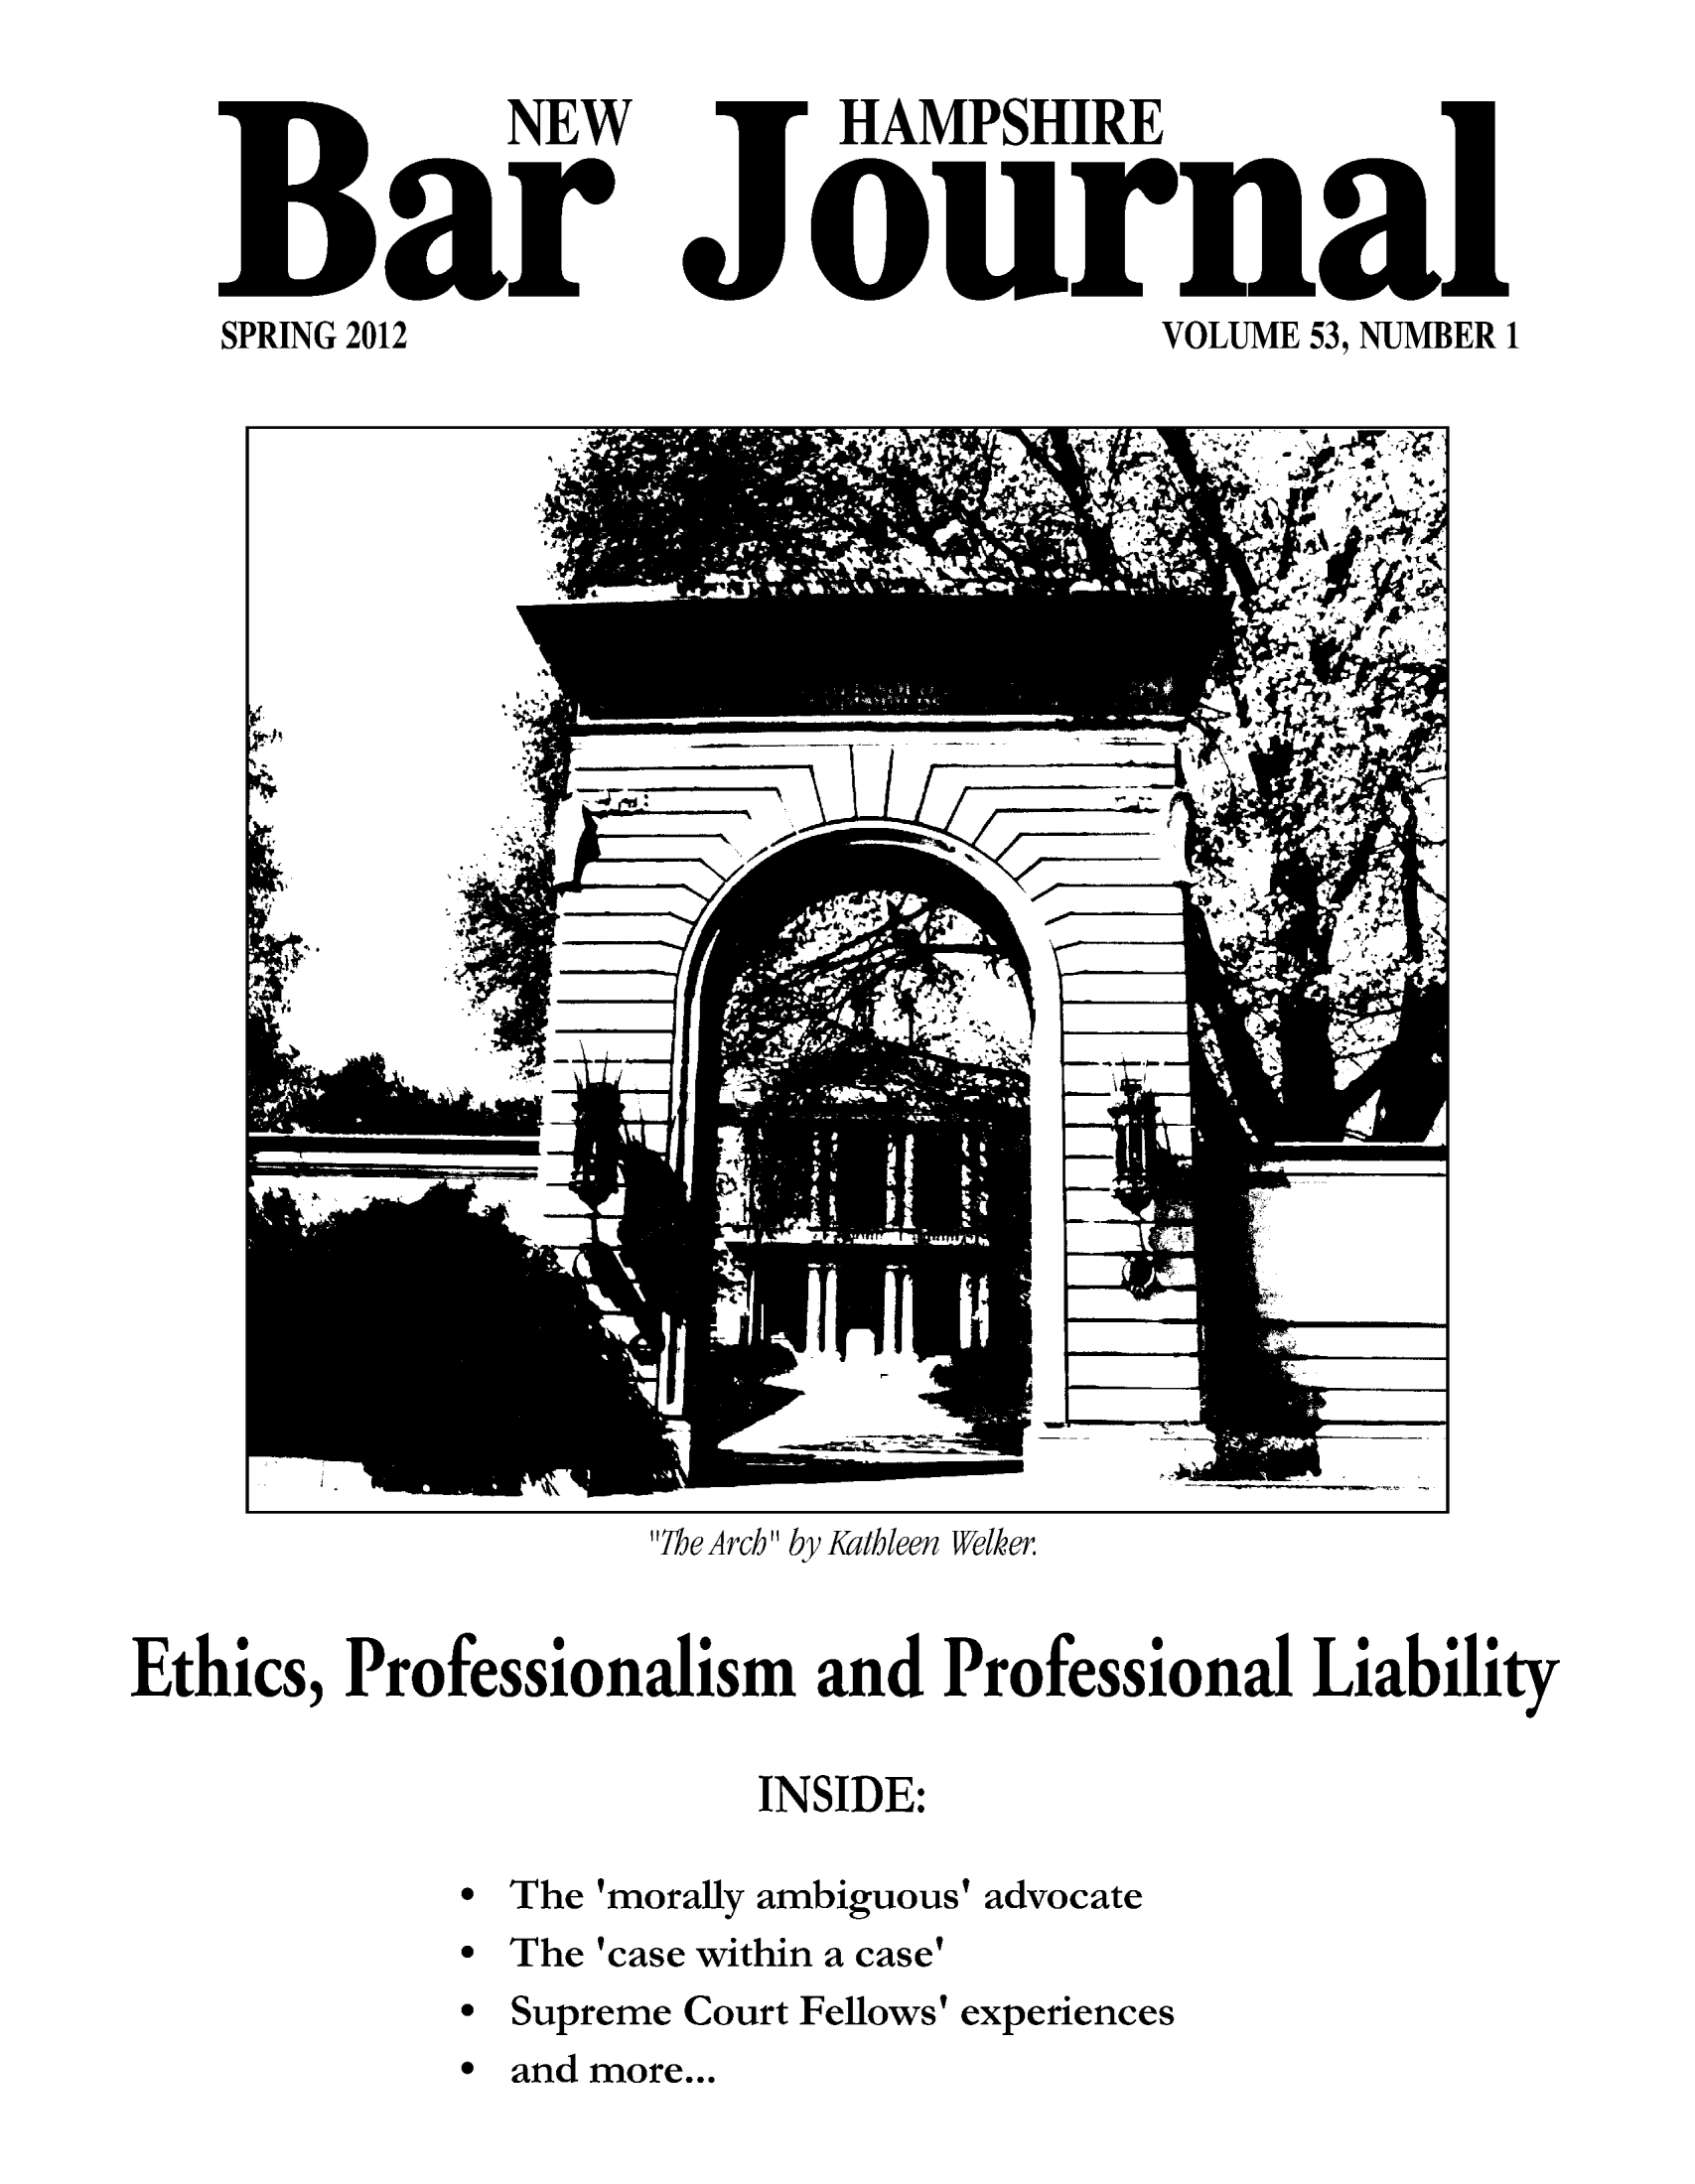 handle is hein.barjournals/newhbj0053 and id is 1 raw text is: NEW
B ar
SPRING 2012

HAMPSHIRE
Jour na
VOLUME 53, NUMBER 1

The Arch by Kathleen Welker

Ethics, Professionalism         and Professional Liability
INSIDE:
* The 'morally ambiguous' advocate
* The 'case within a case'
* Supreme Court Fellows' experiences
* and more...


